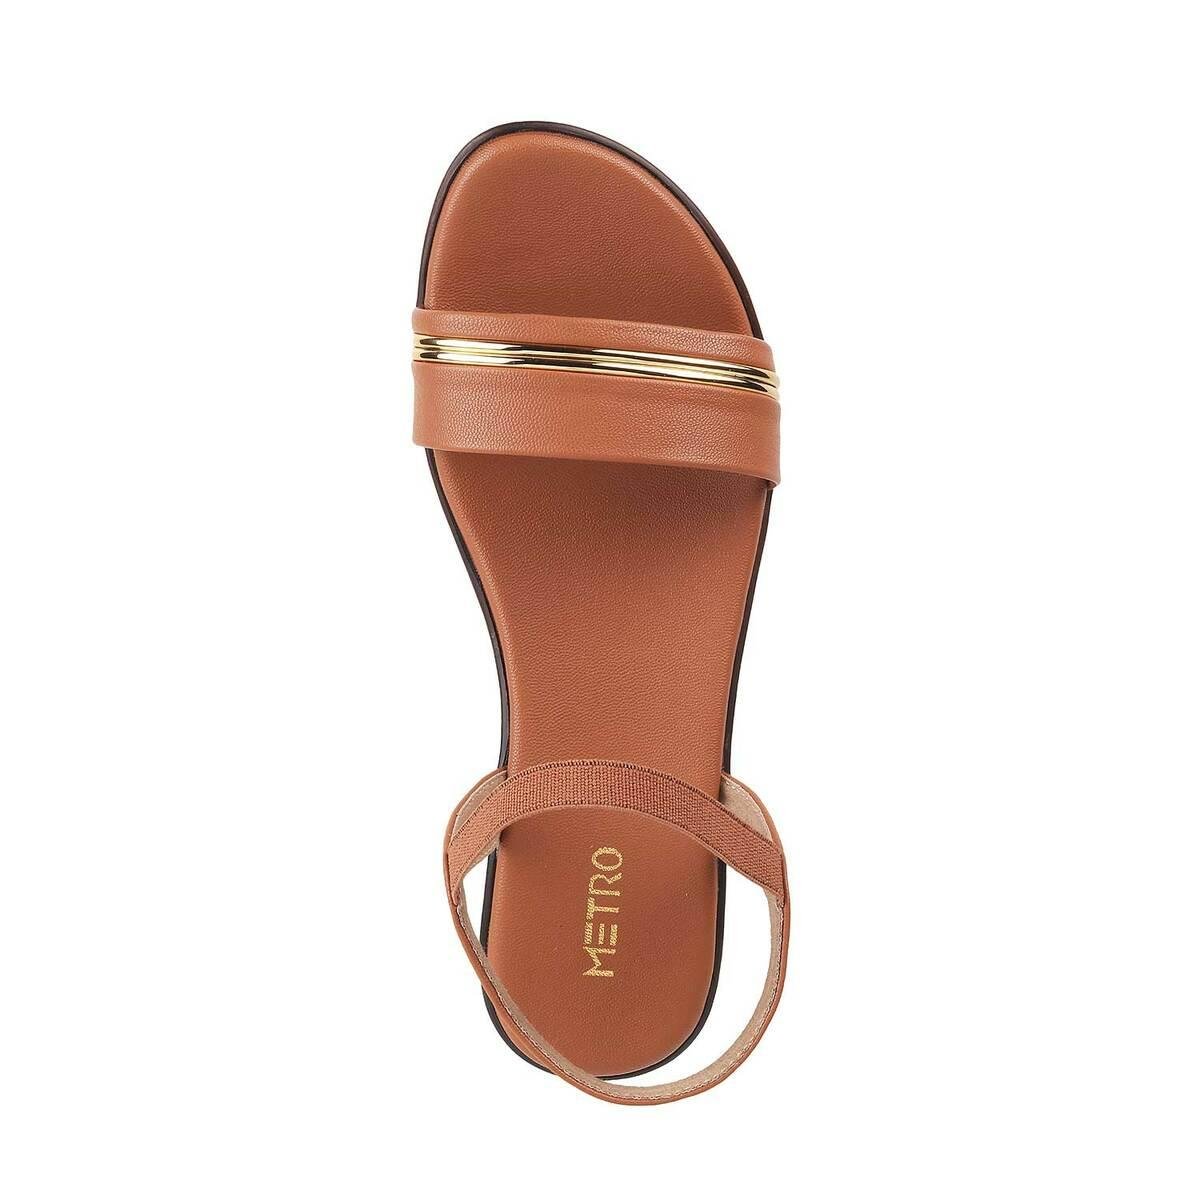 Flats & Sandals Daily Wear FOOTSAPP 136-13, Size: 36*41 at Rs 160